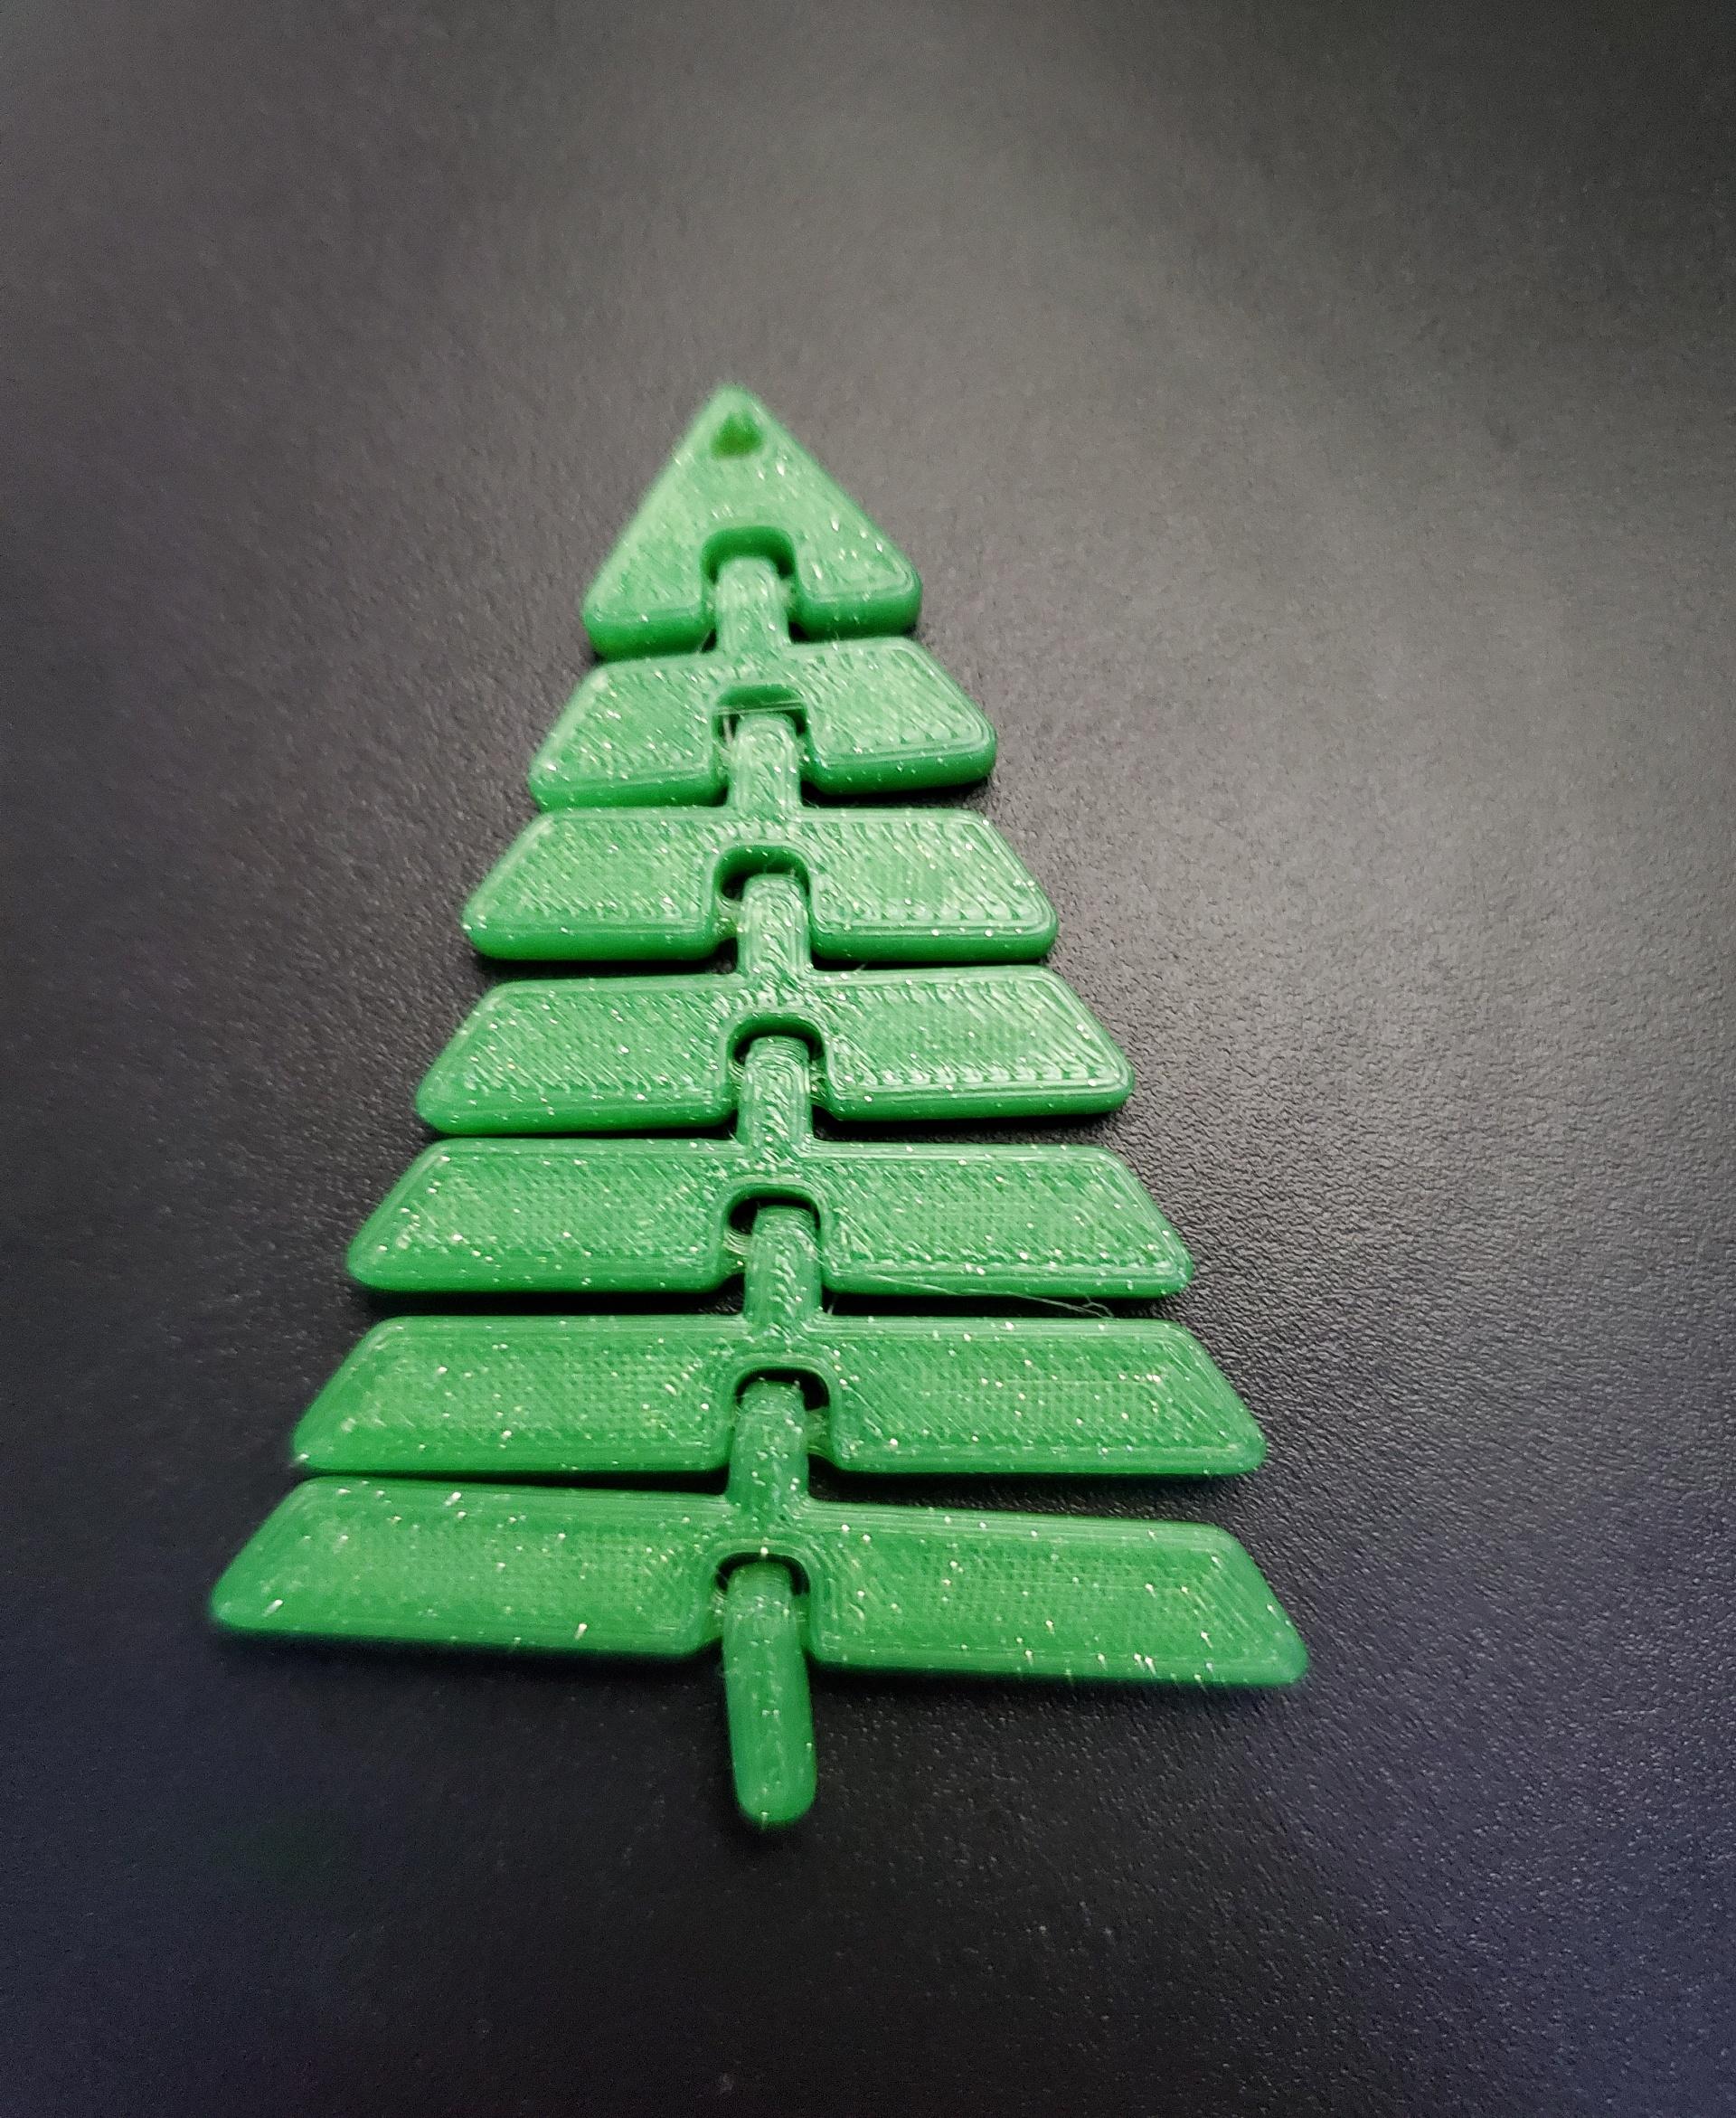 Articulated Christmas Tree Keychain - Print in place fidget toy - protopasta fleck n forest green - 3d model